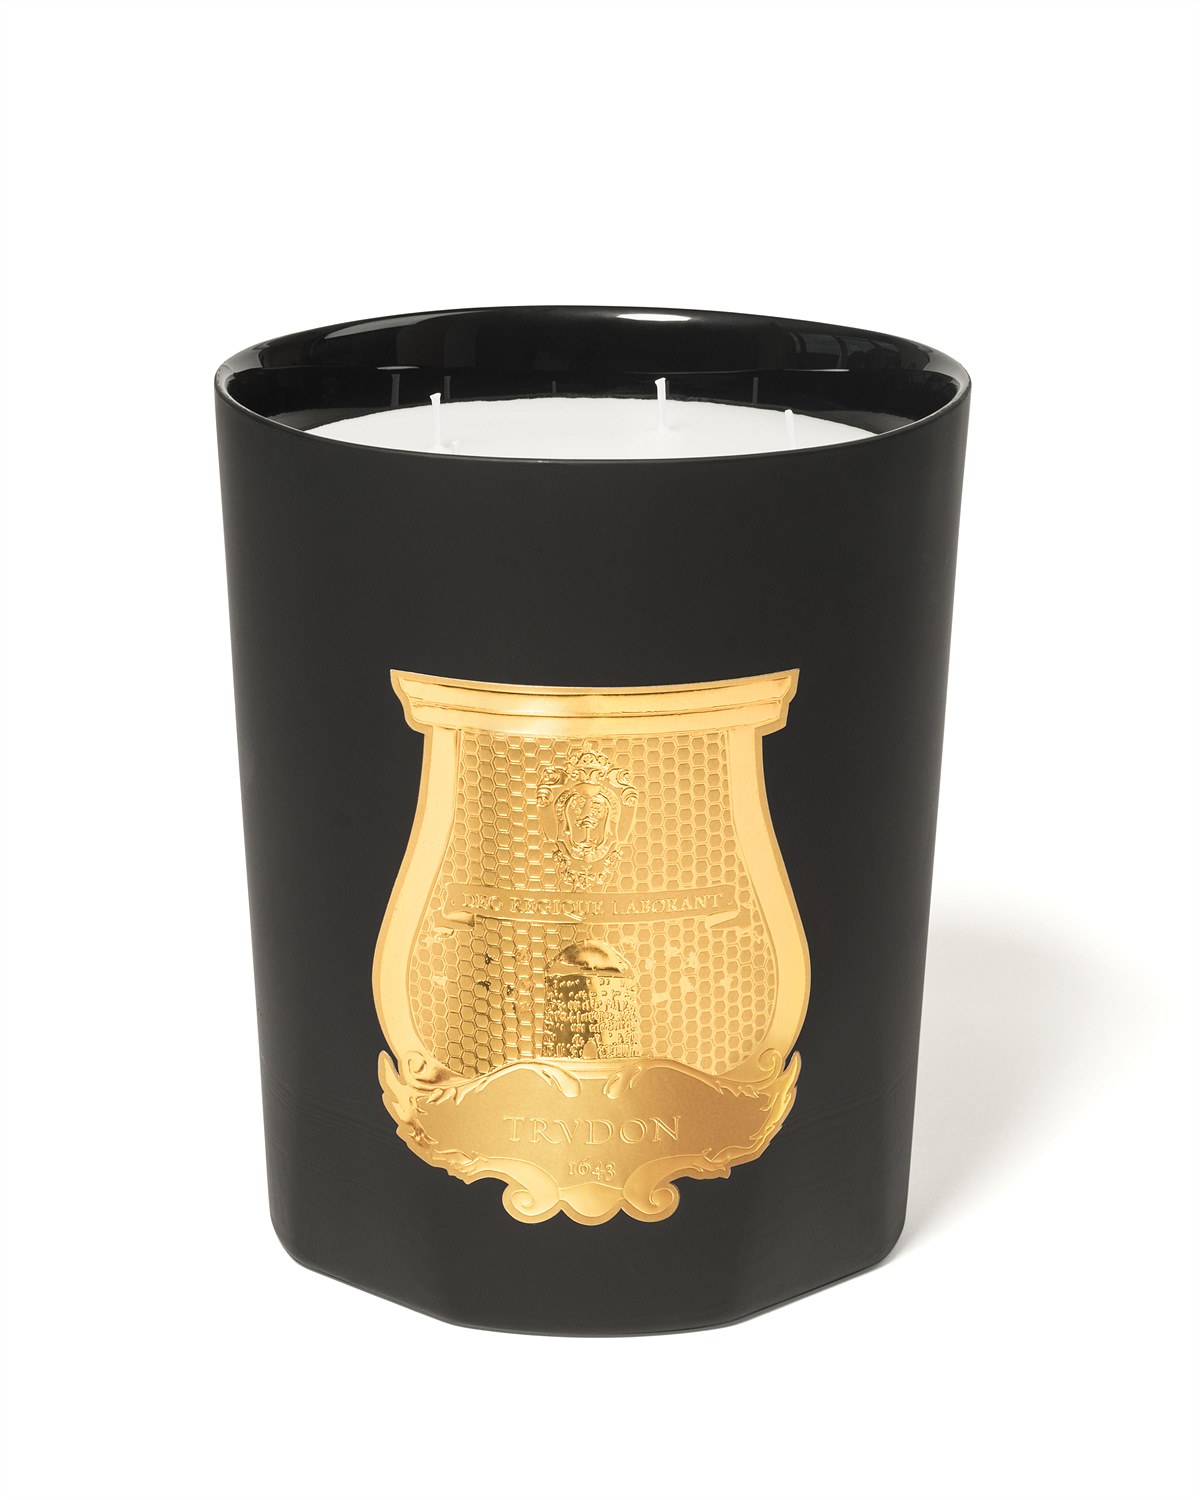 Trudon - Mary Great Candle